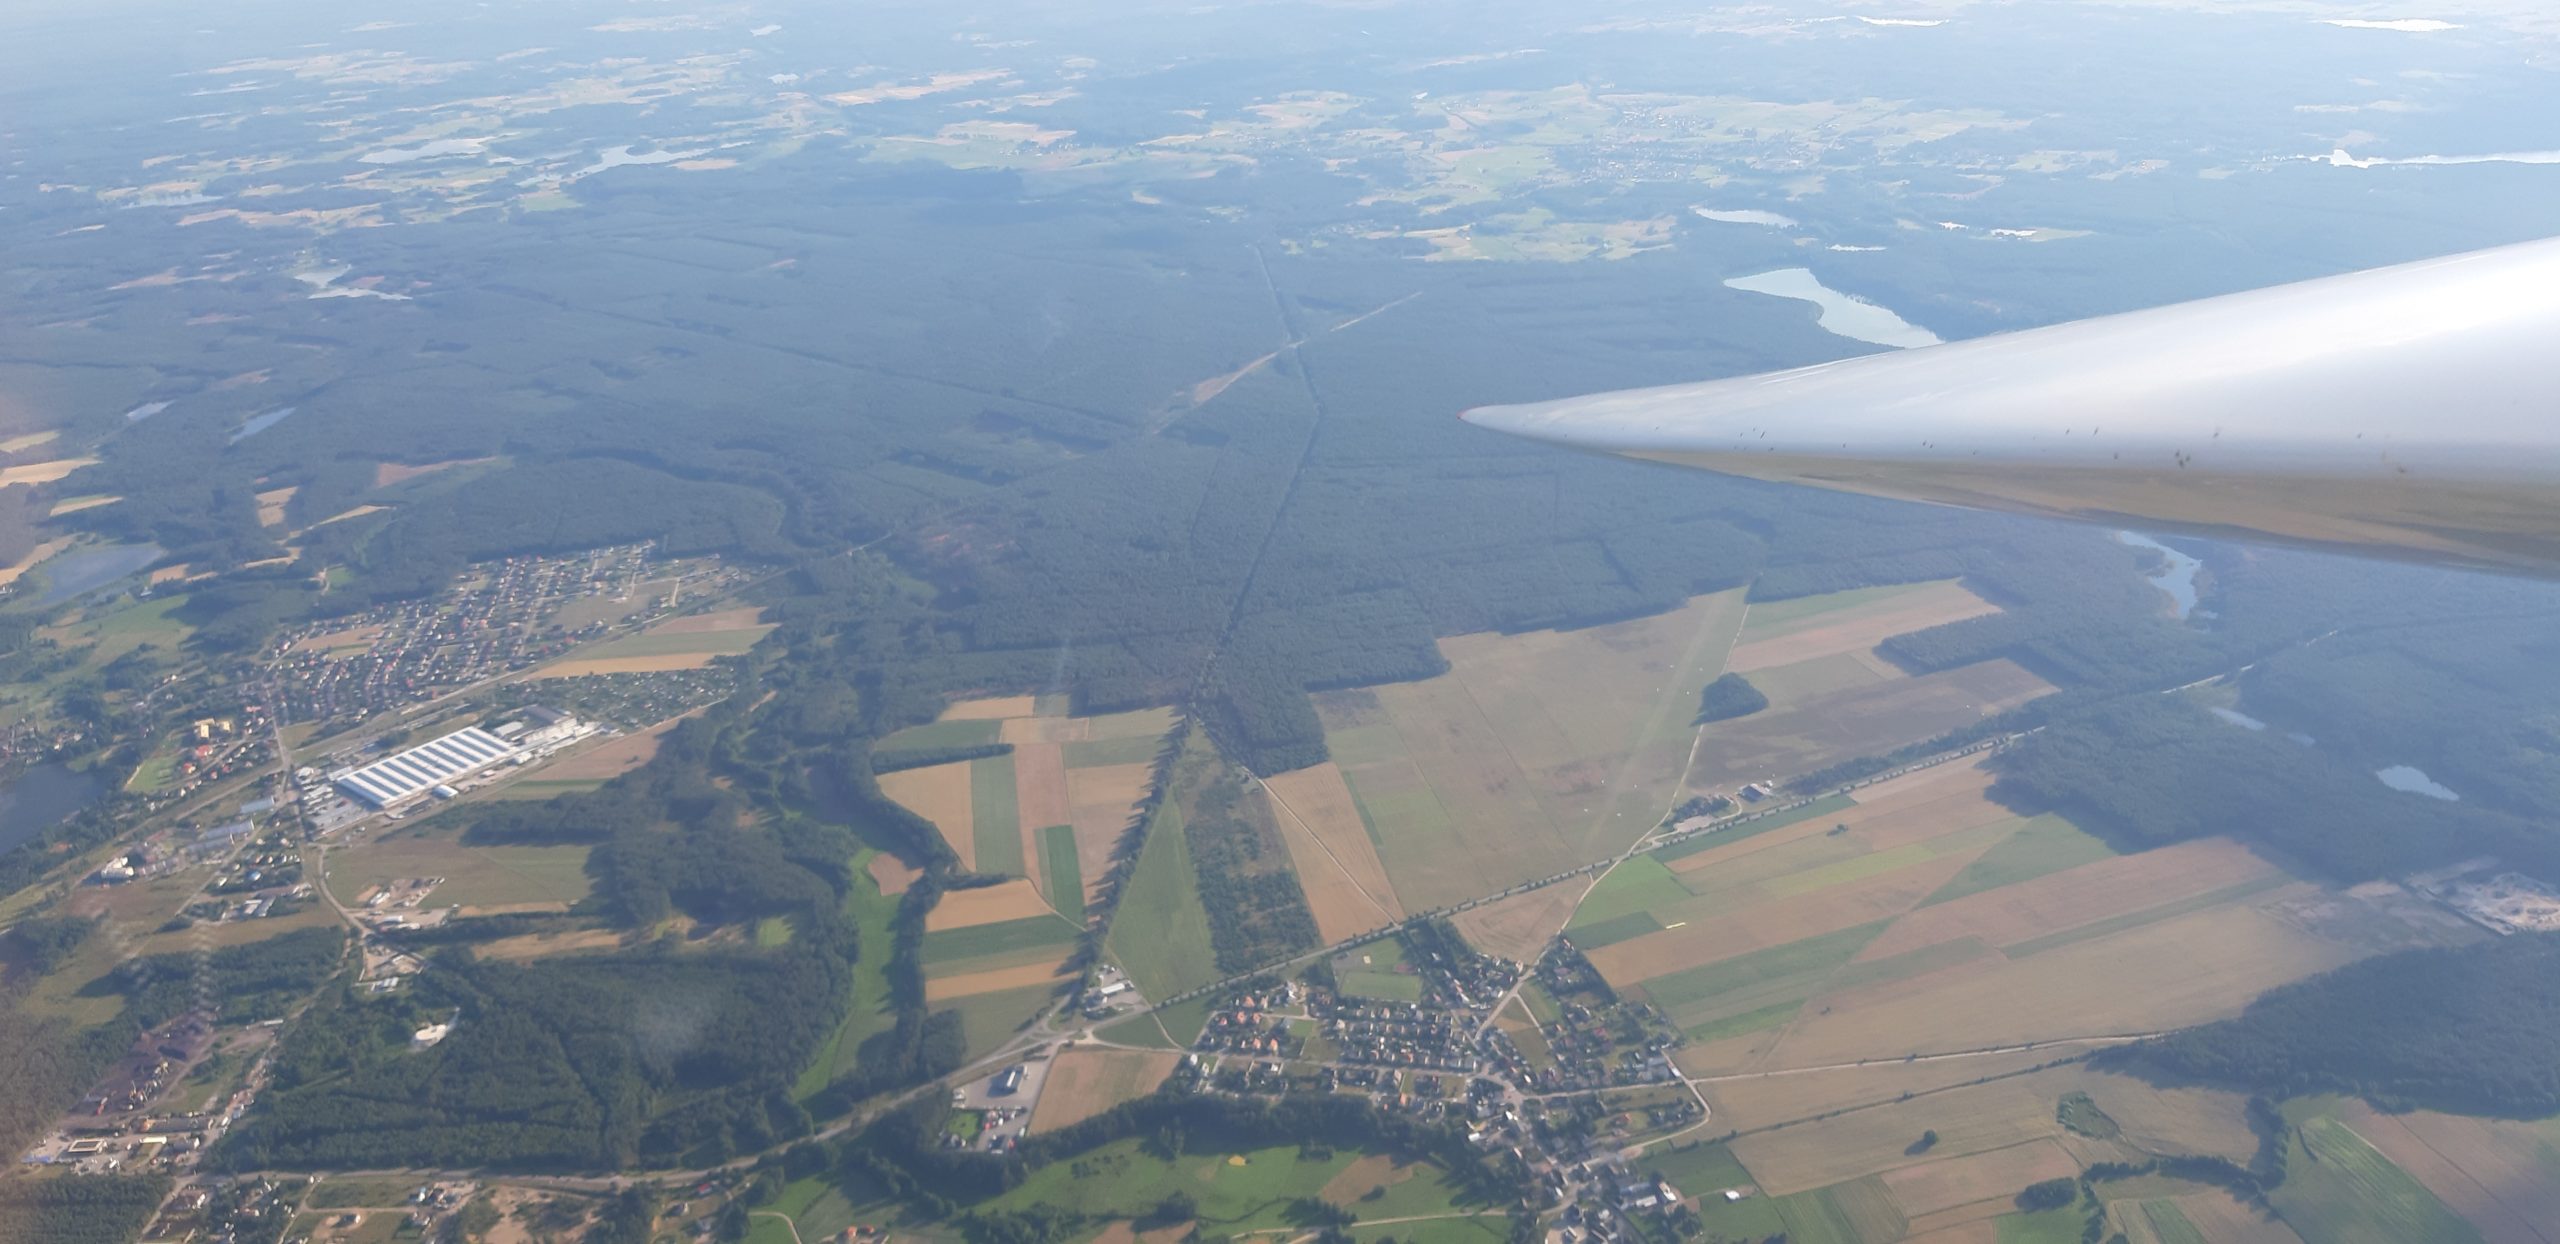 To the left you can see your finish point - characteristic white roof of Lubiana - porcelain factory, and to the right under the wing airfield as seen in direction 24.